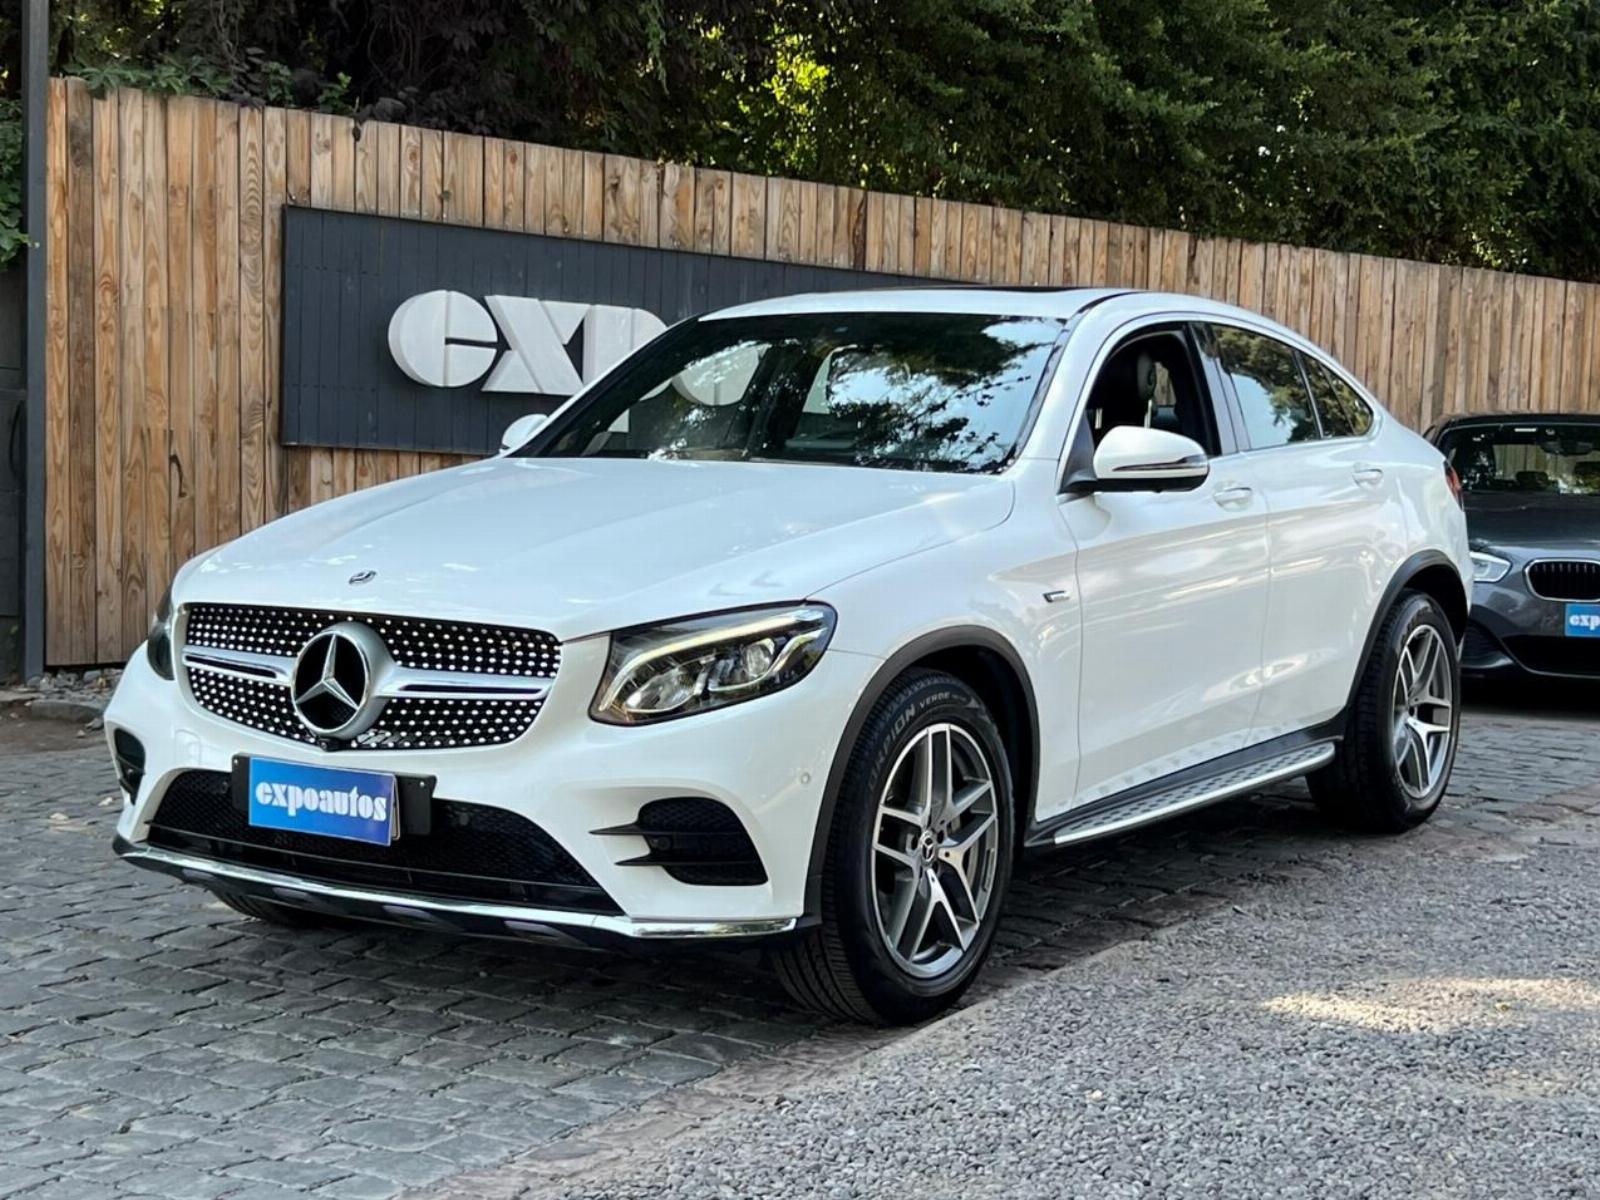 MERCEDES-BENZ GLC 300 COUPE 4MATIC 2019 VERSION COUPE - FULL MOTOR